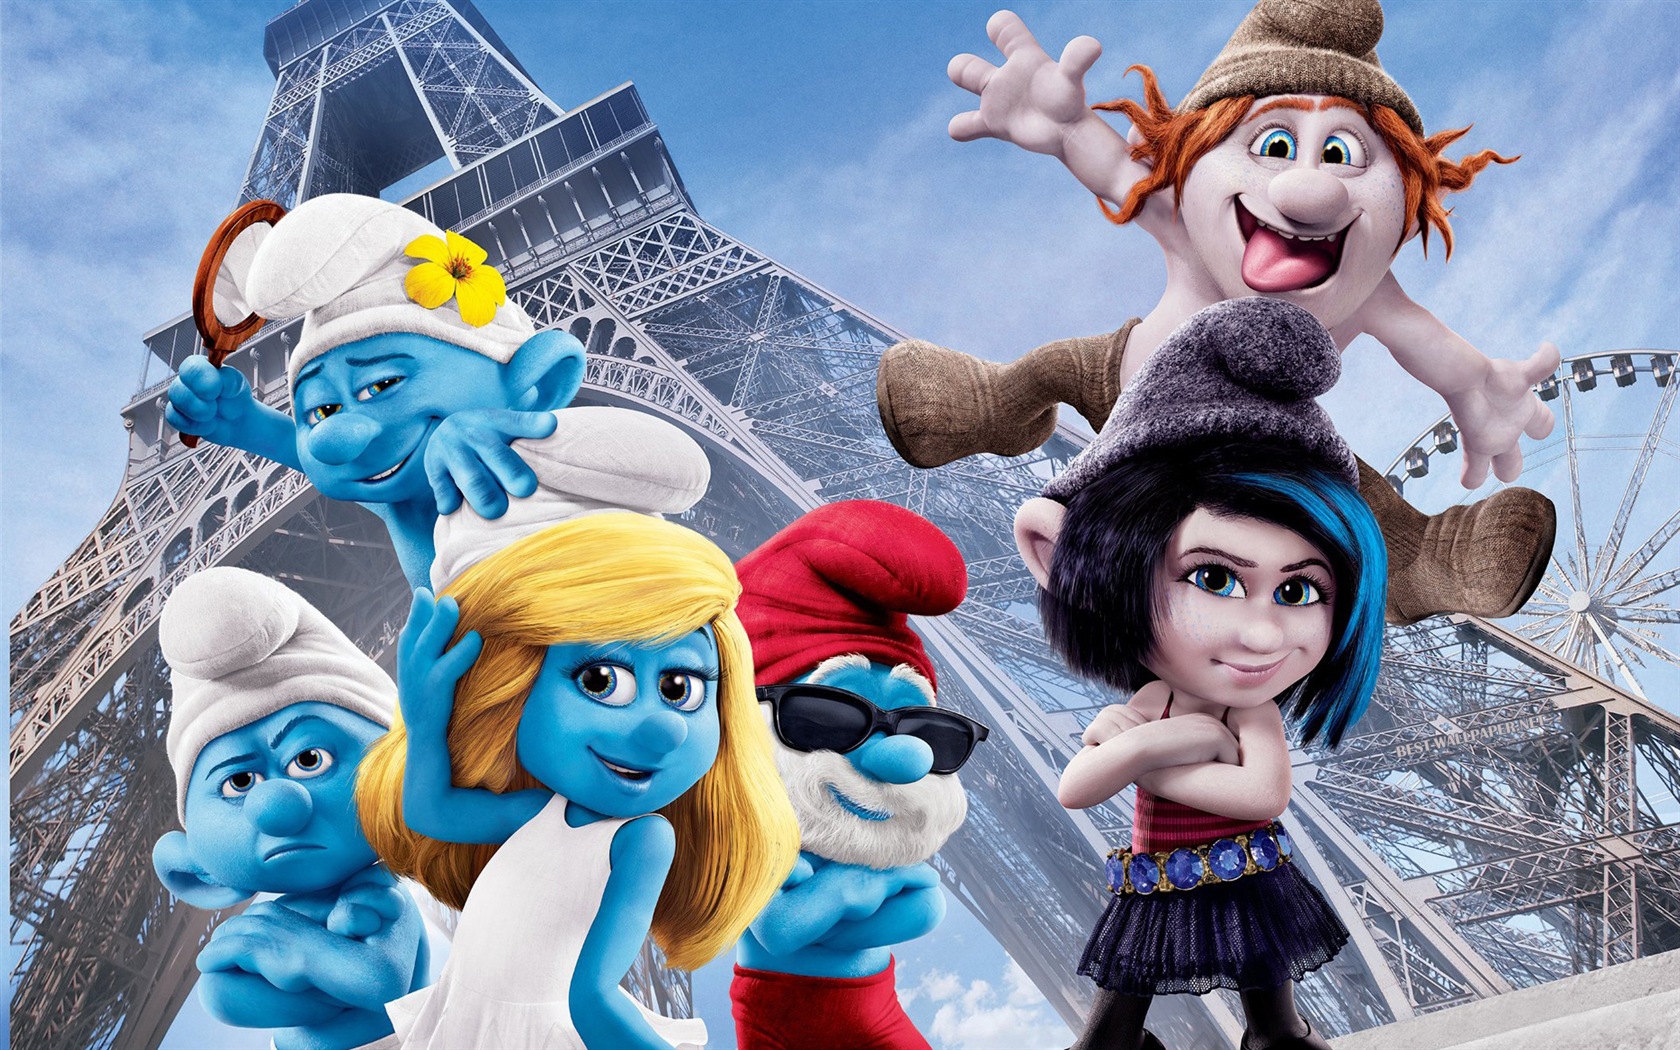 The Smurfs 2 HD movie wallpapers #1 - 1680x1050